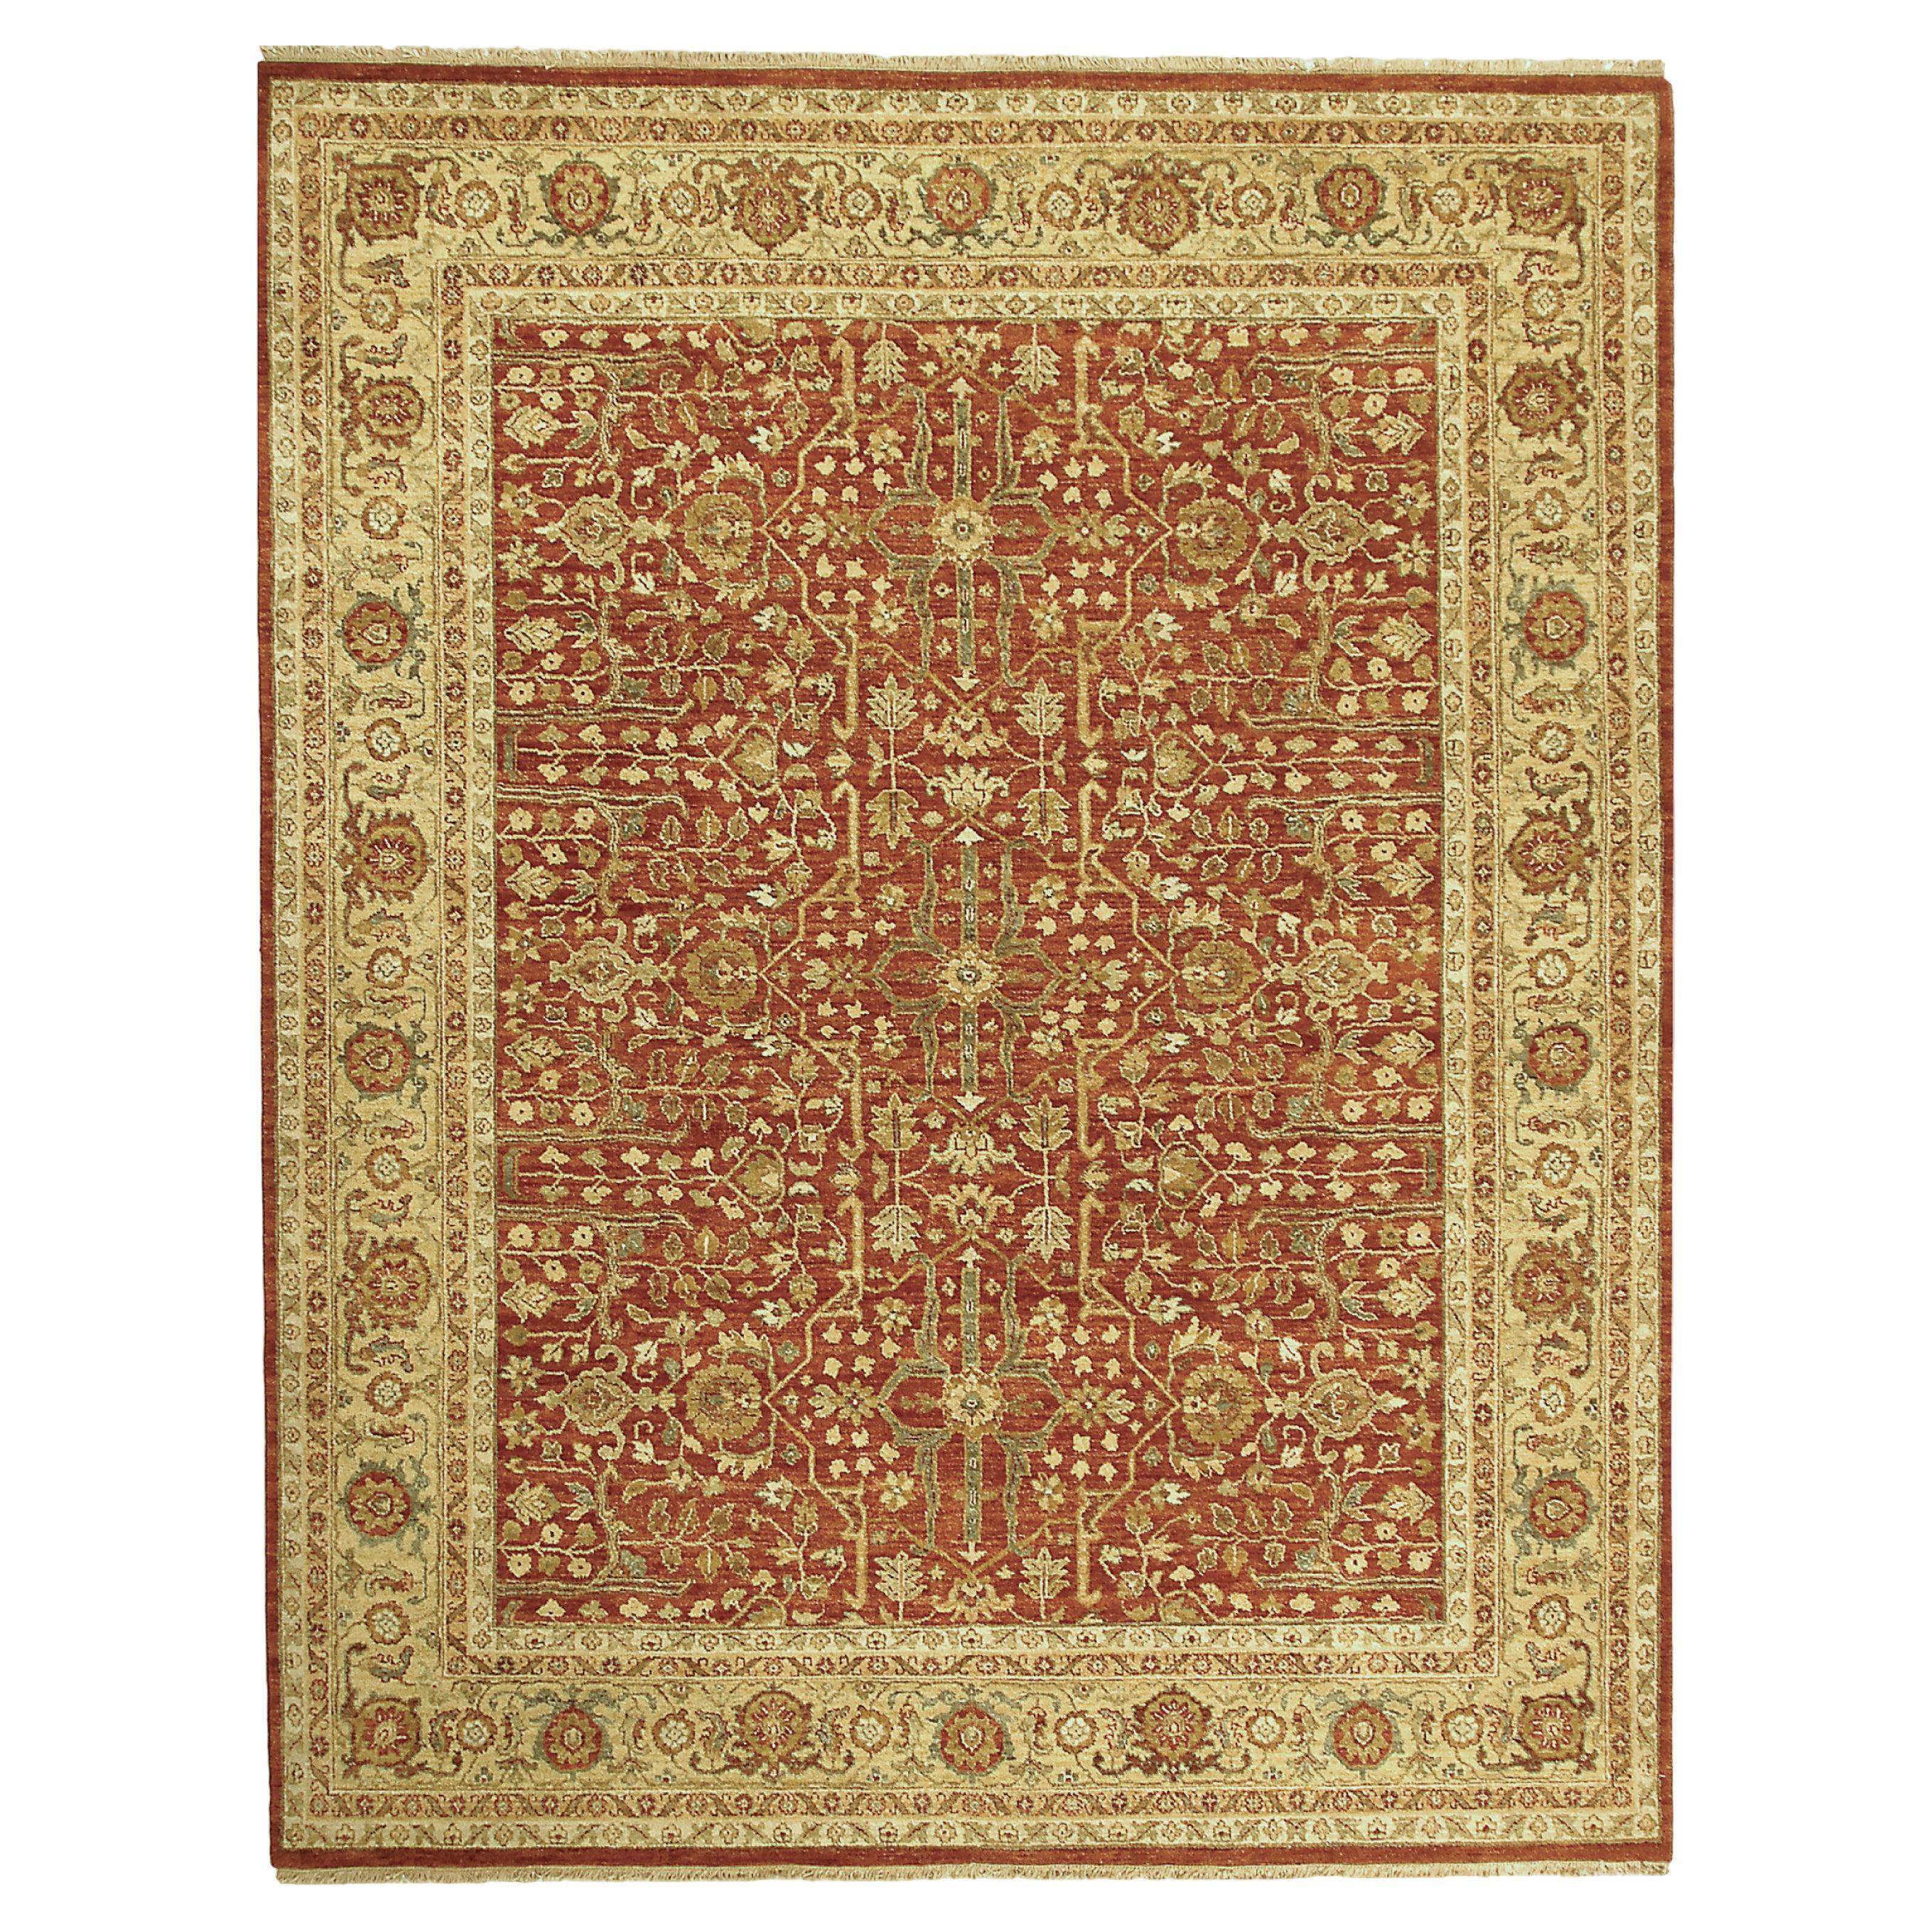 Luxury Traditional Hand-Knotted Ziegler Rust/Gold 12x18 Rug